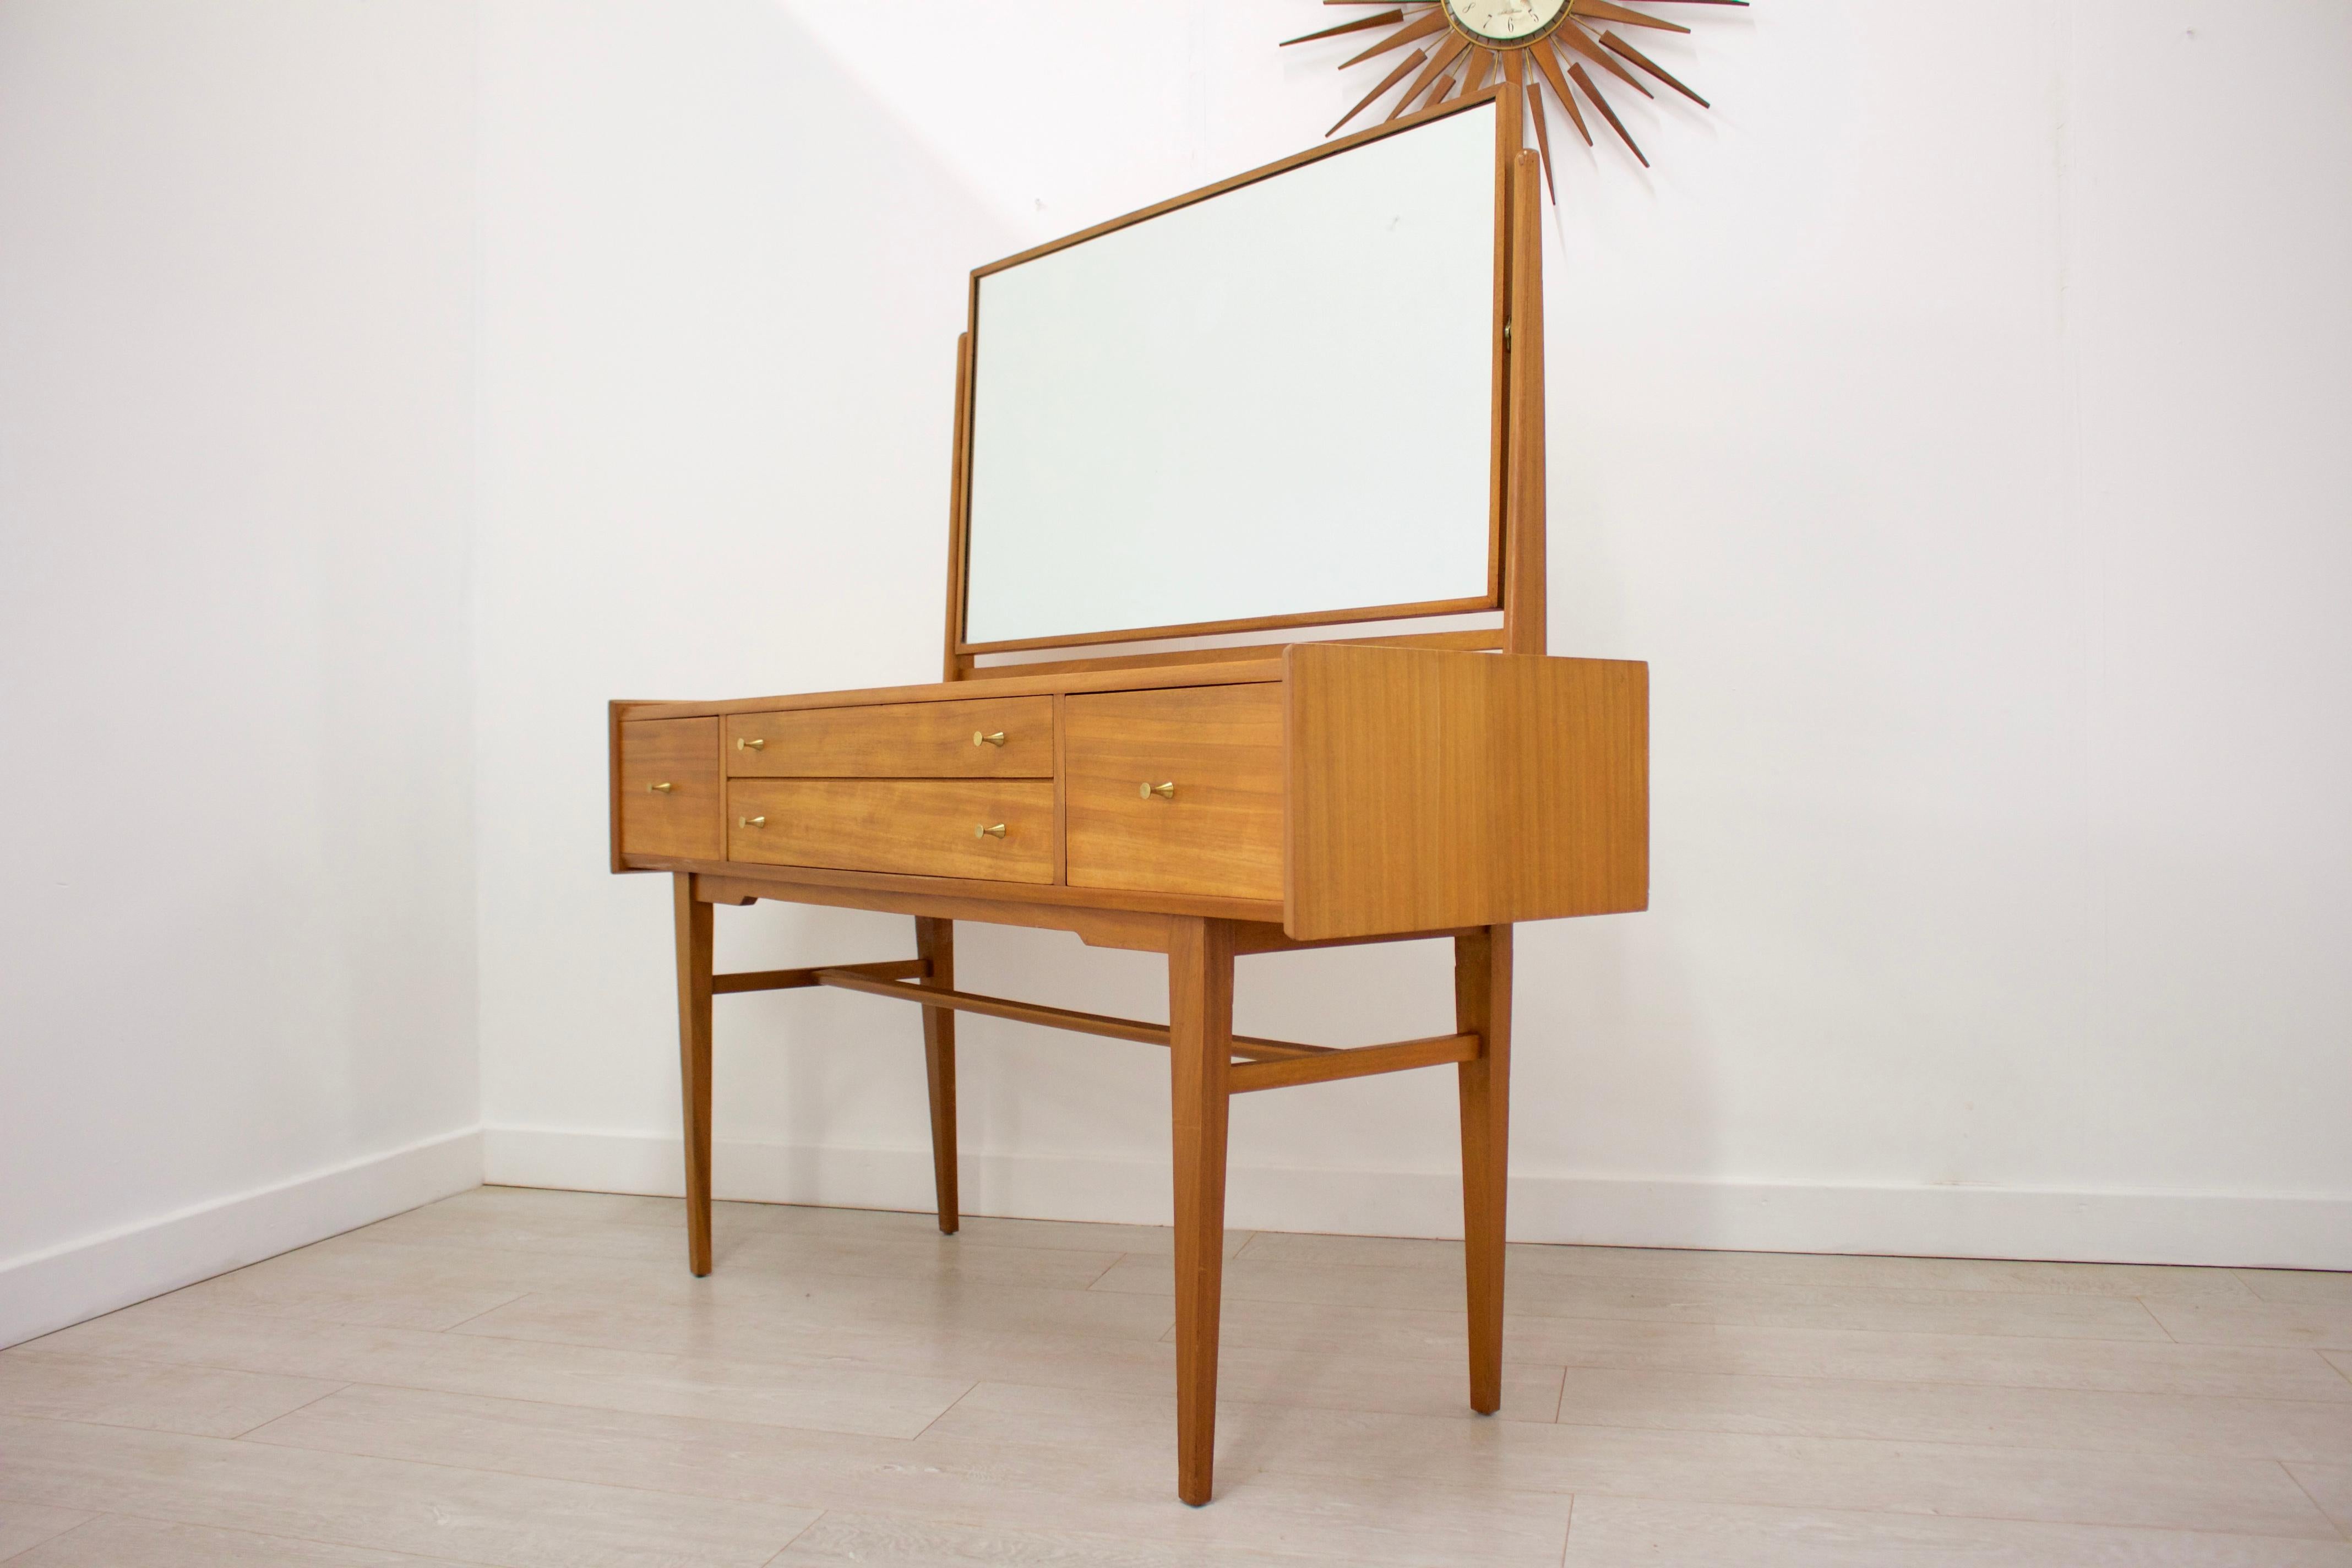 - Midcentury dressing table
- Made in the UK by Younger
- Made from Walnut & Walnut Veneer
- Height including the mirror: 130cm